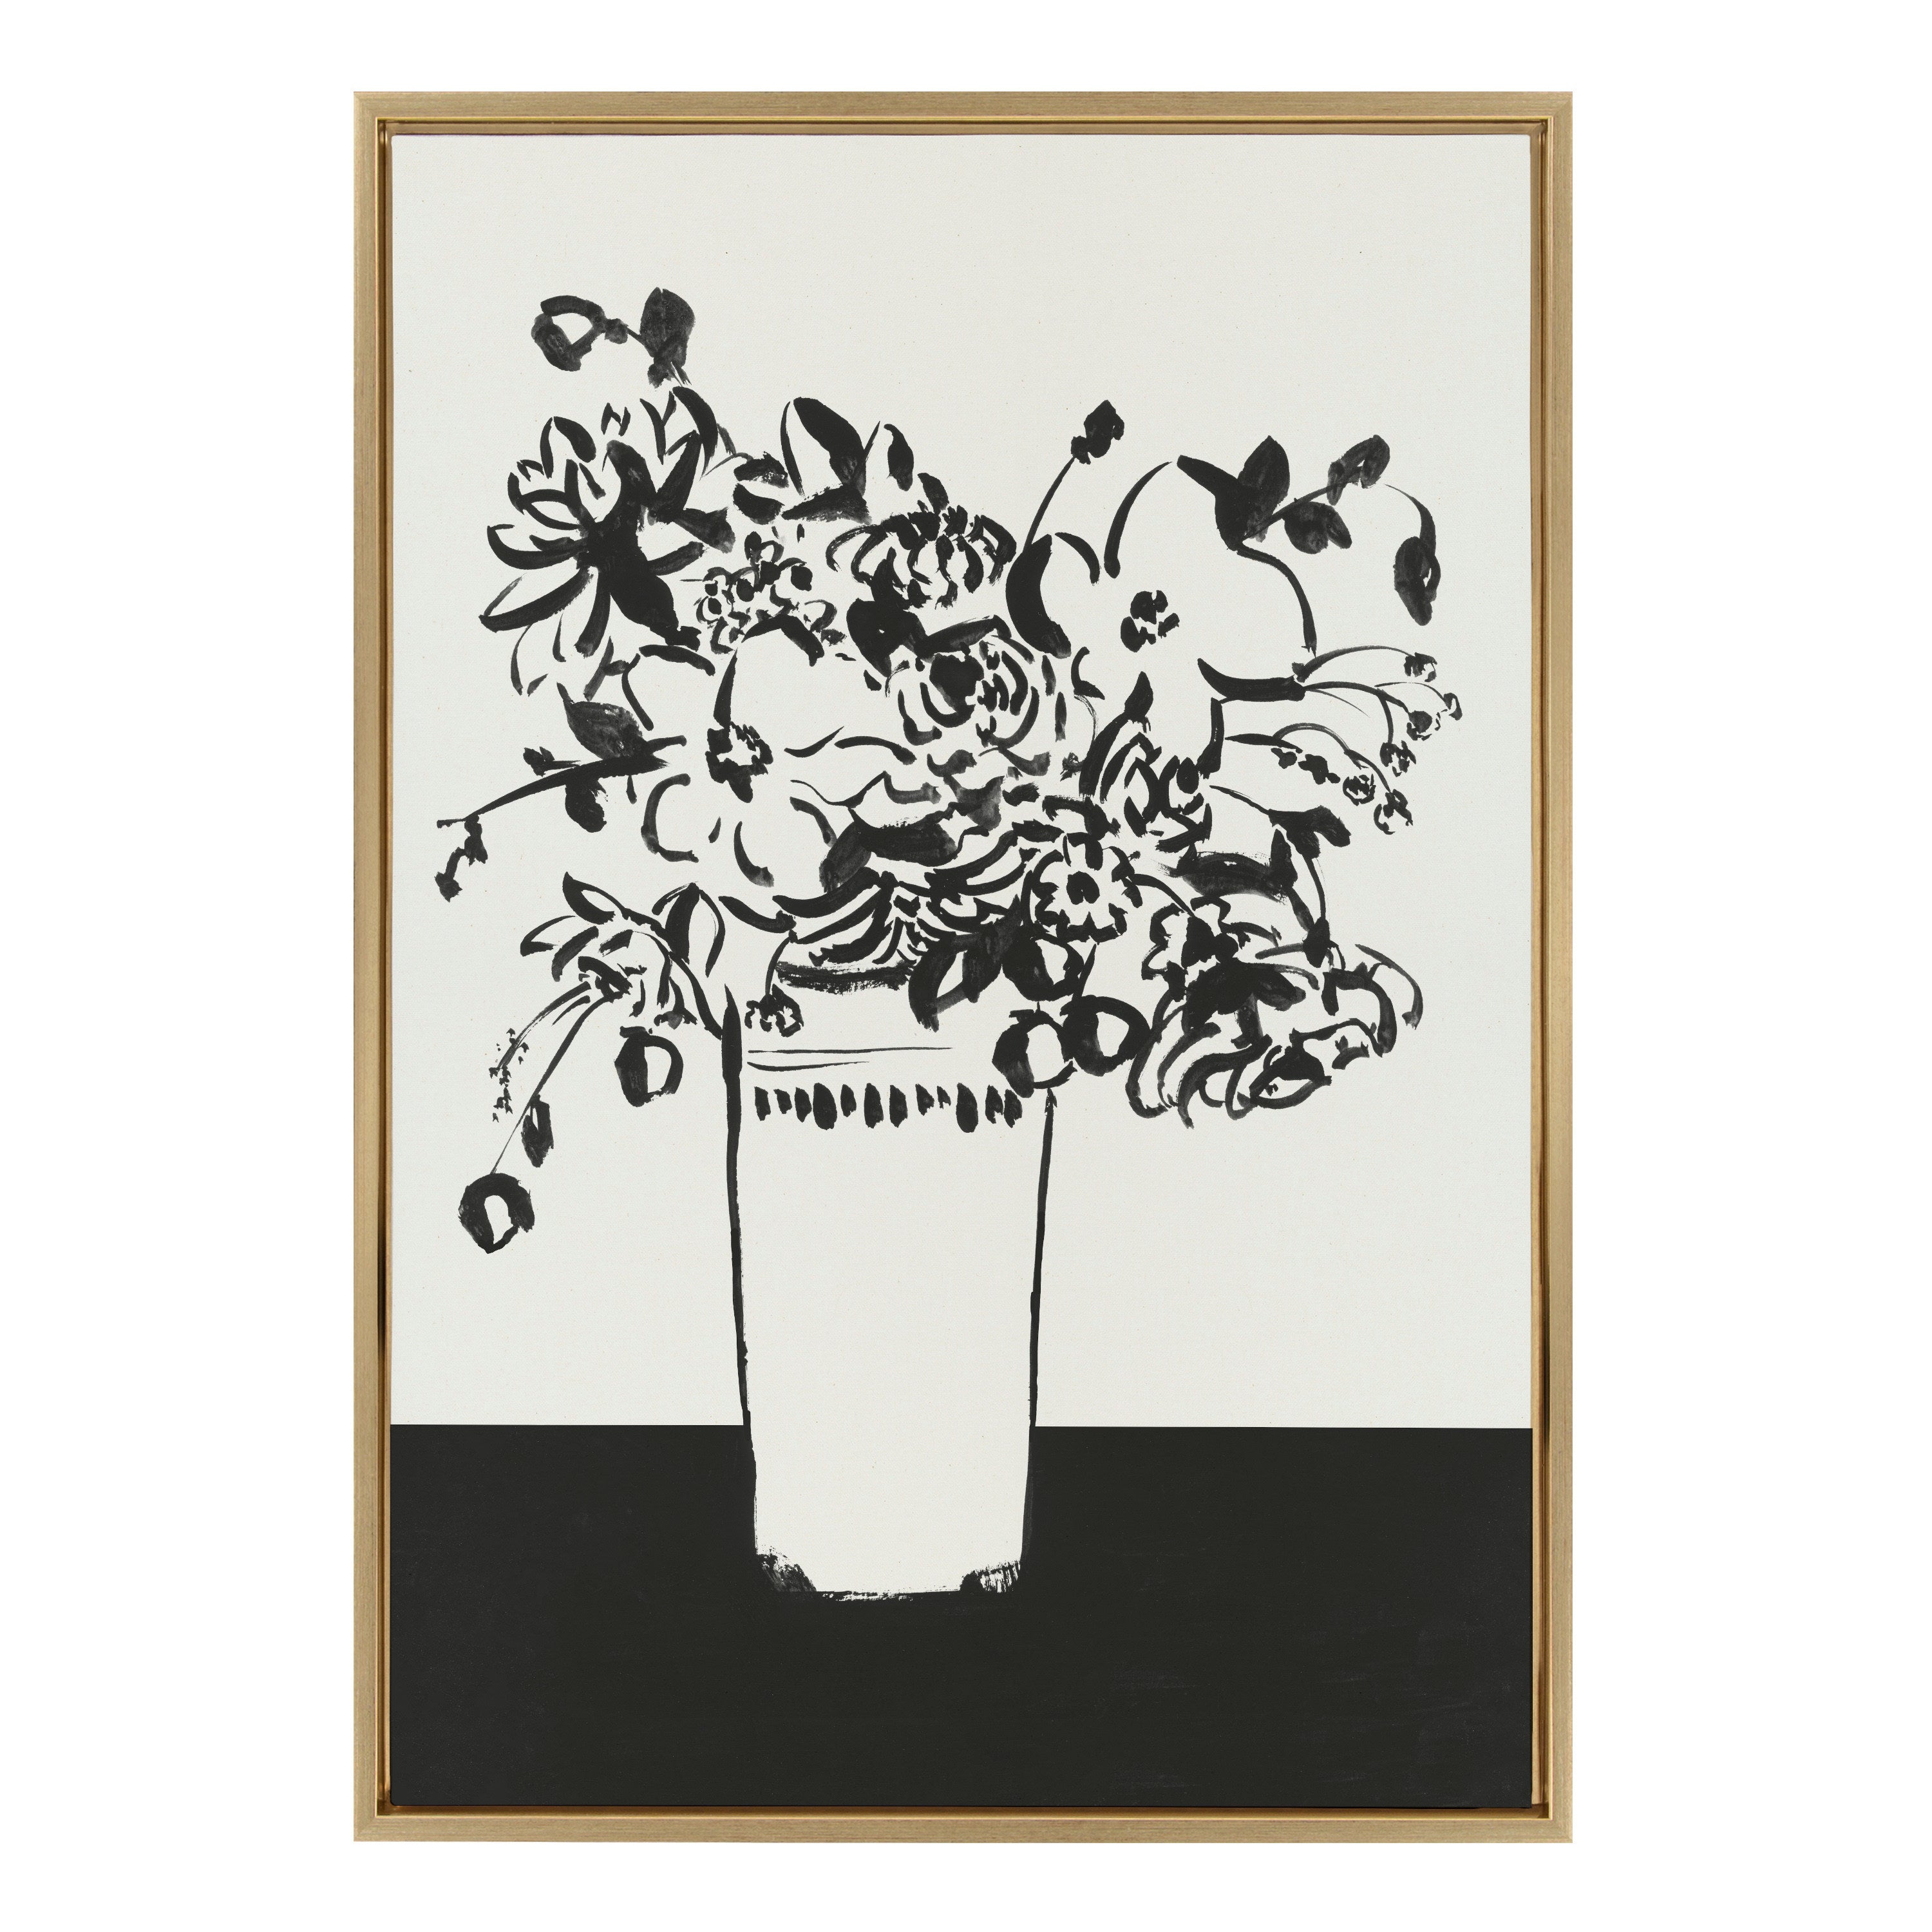 Sylvie 1043 Black and White Vase Framed Canvas by Teju Reval of SnazzyHues